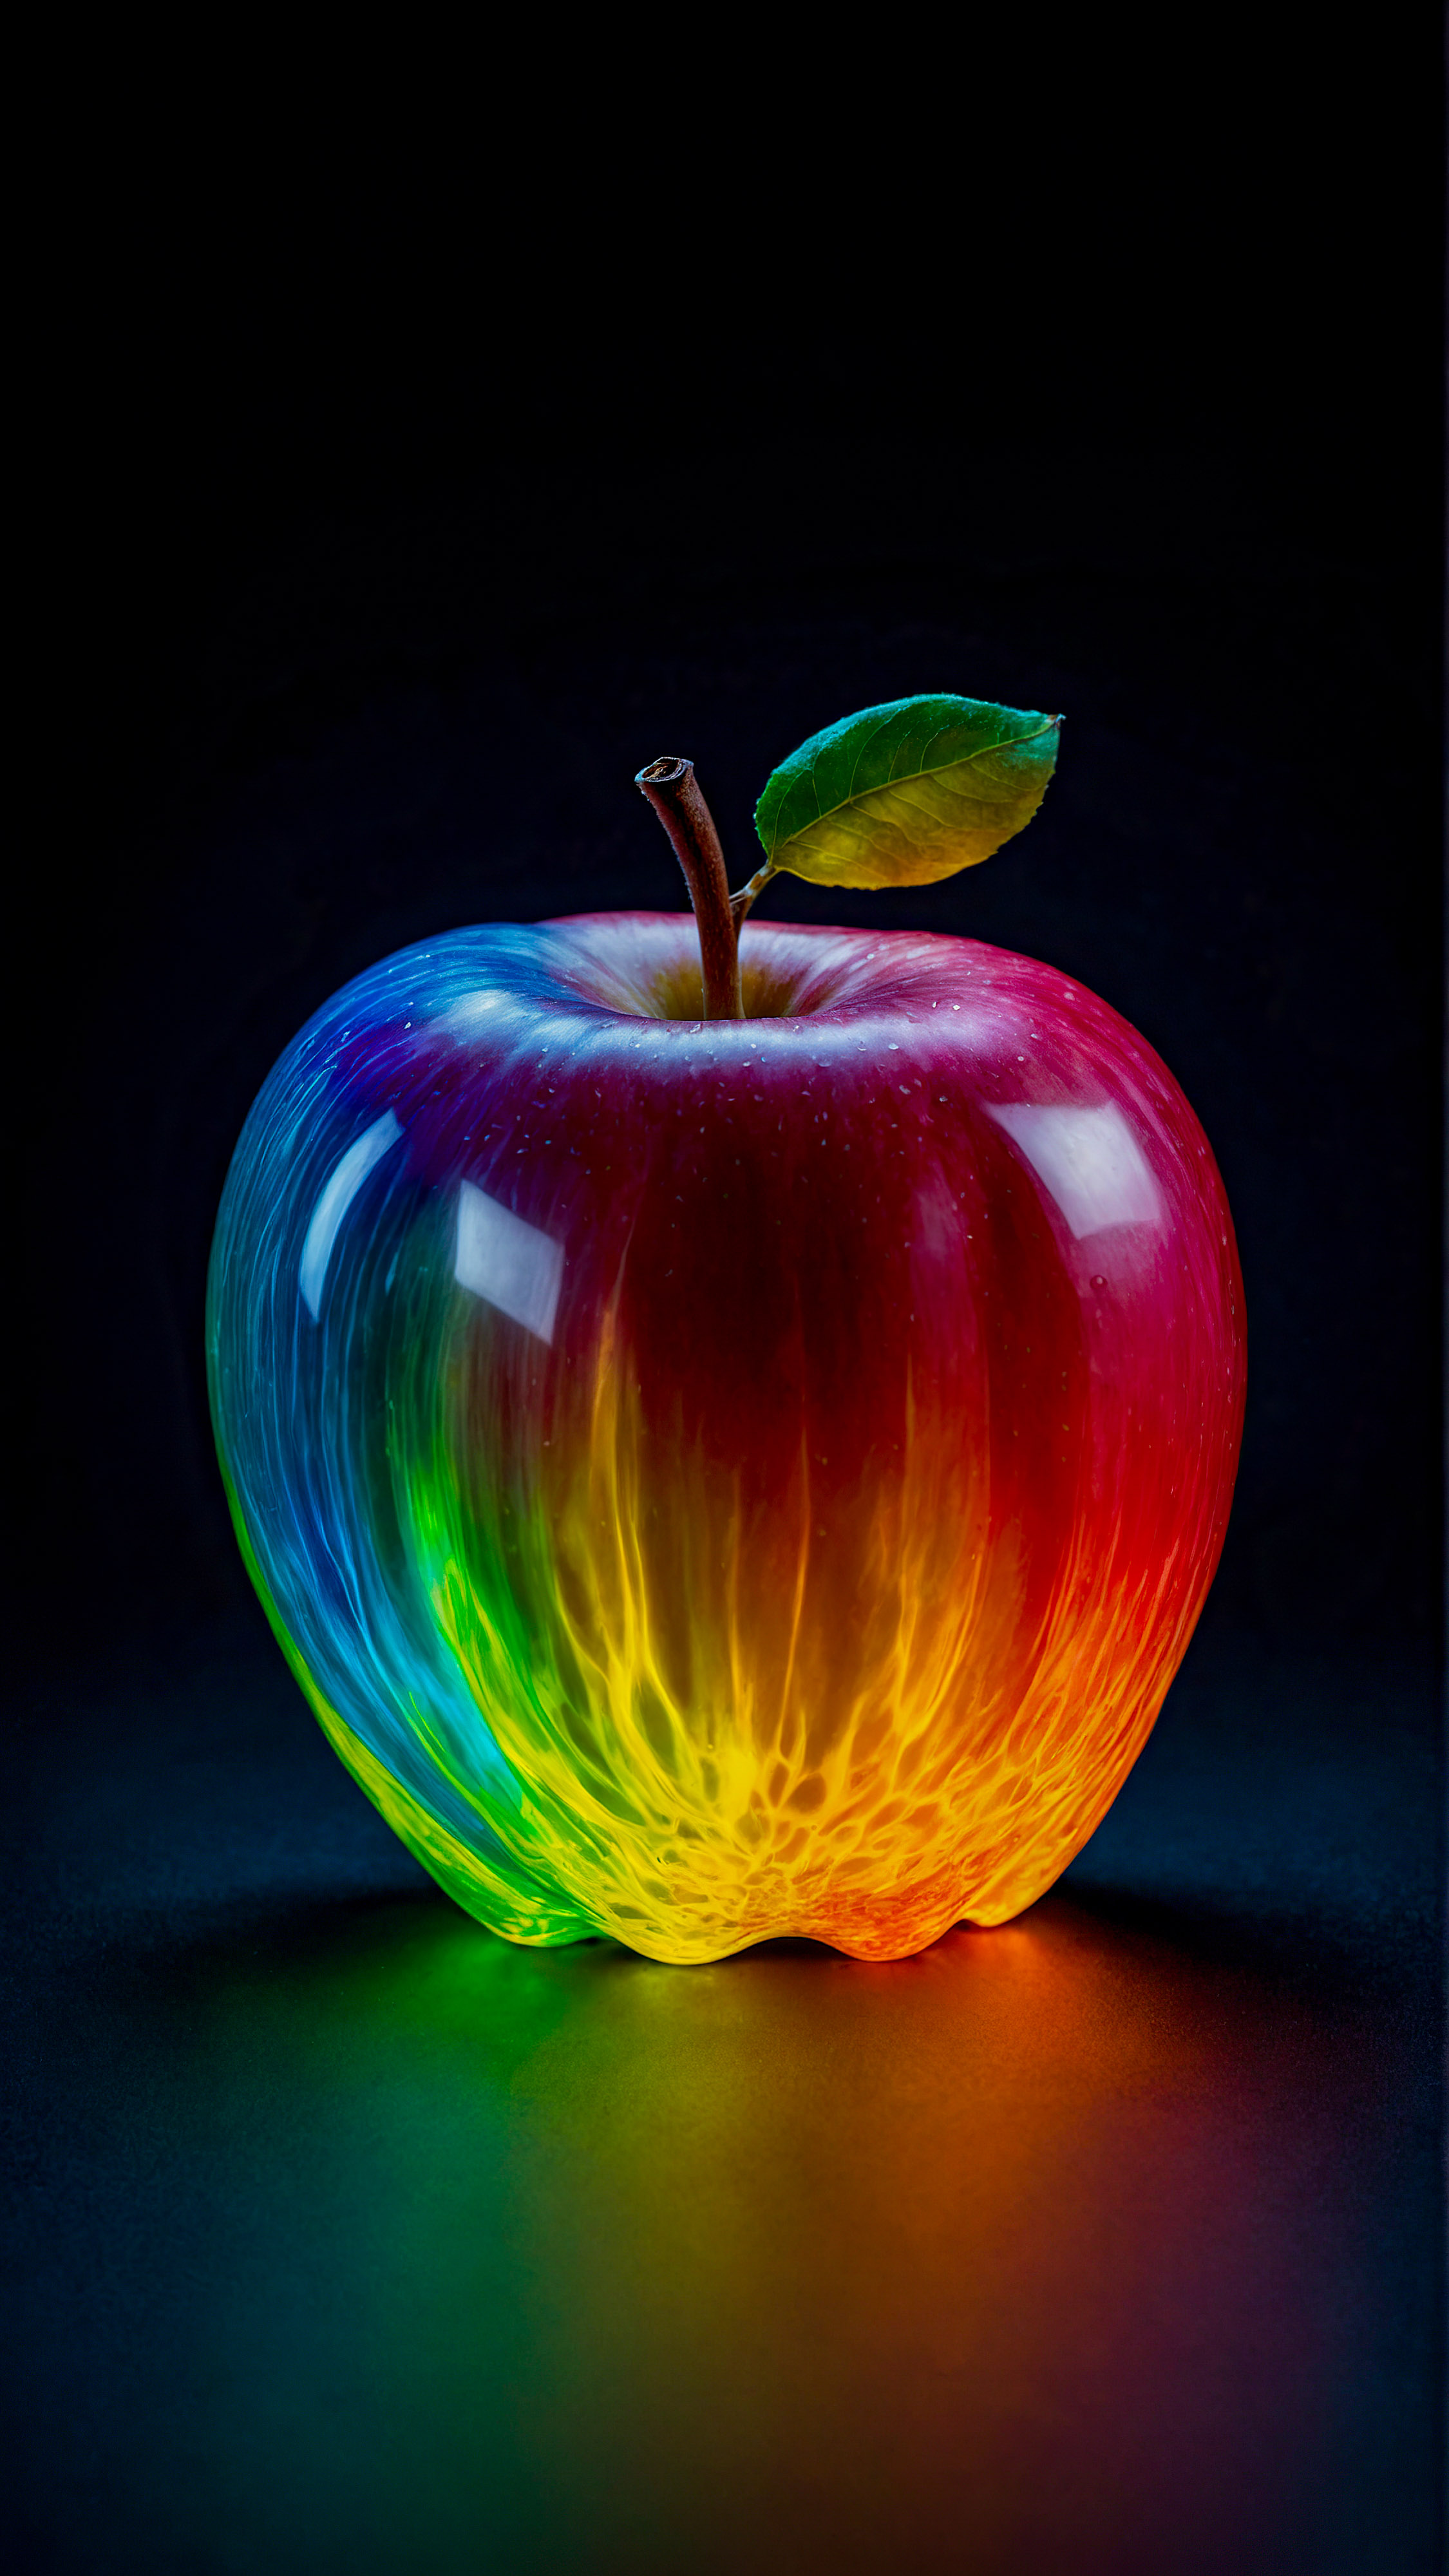 Admire the elegance of our ultra HD Apple wallpaper in 4K, showcasing a colorful, illuminated ghost-like Apple logo with a gradient of vibrant colors against a dark background.